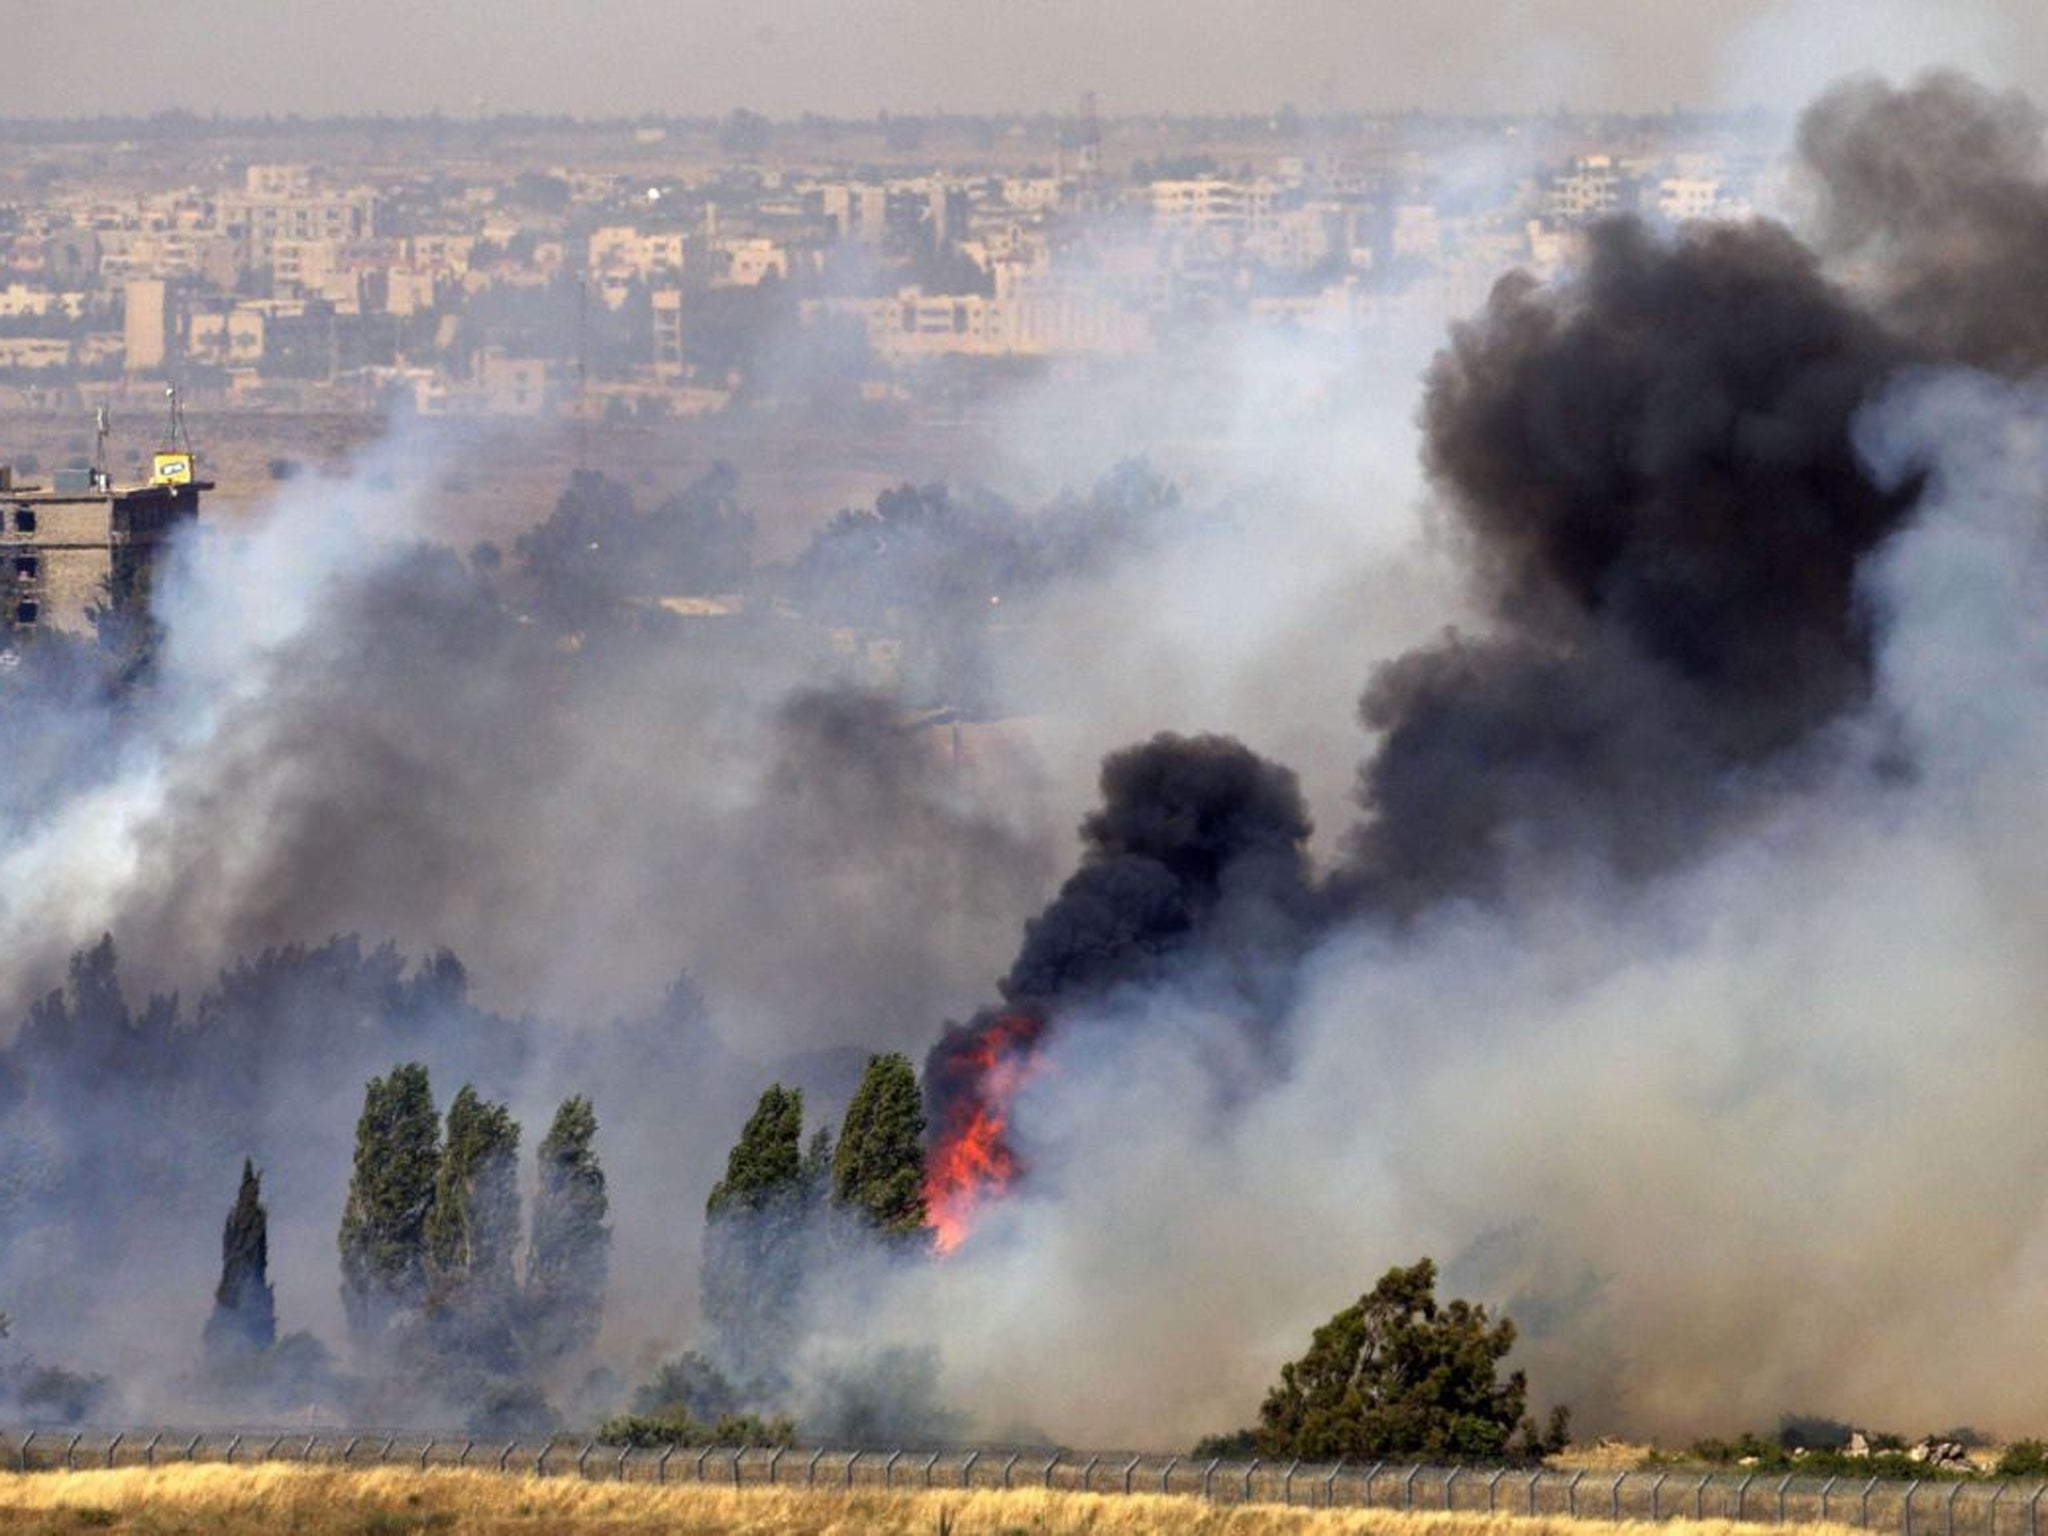 A picture taken on June 6, 2013 from the Israeli side along the Israel-Syria ceasefire line in the Golan Heights shows smoke billowing from a fire caused by clashes between Syrian rebels and forces loyal to the regime near the Quneitra crossing